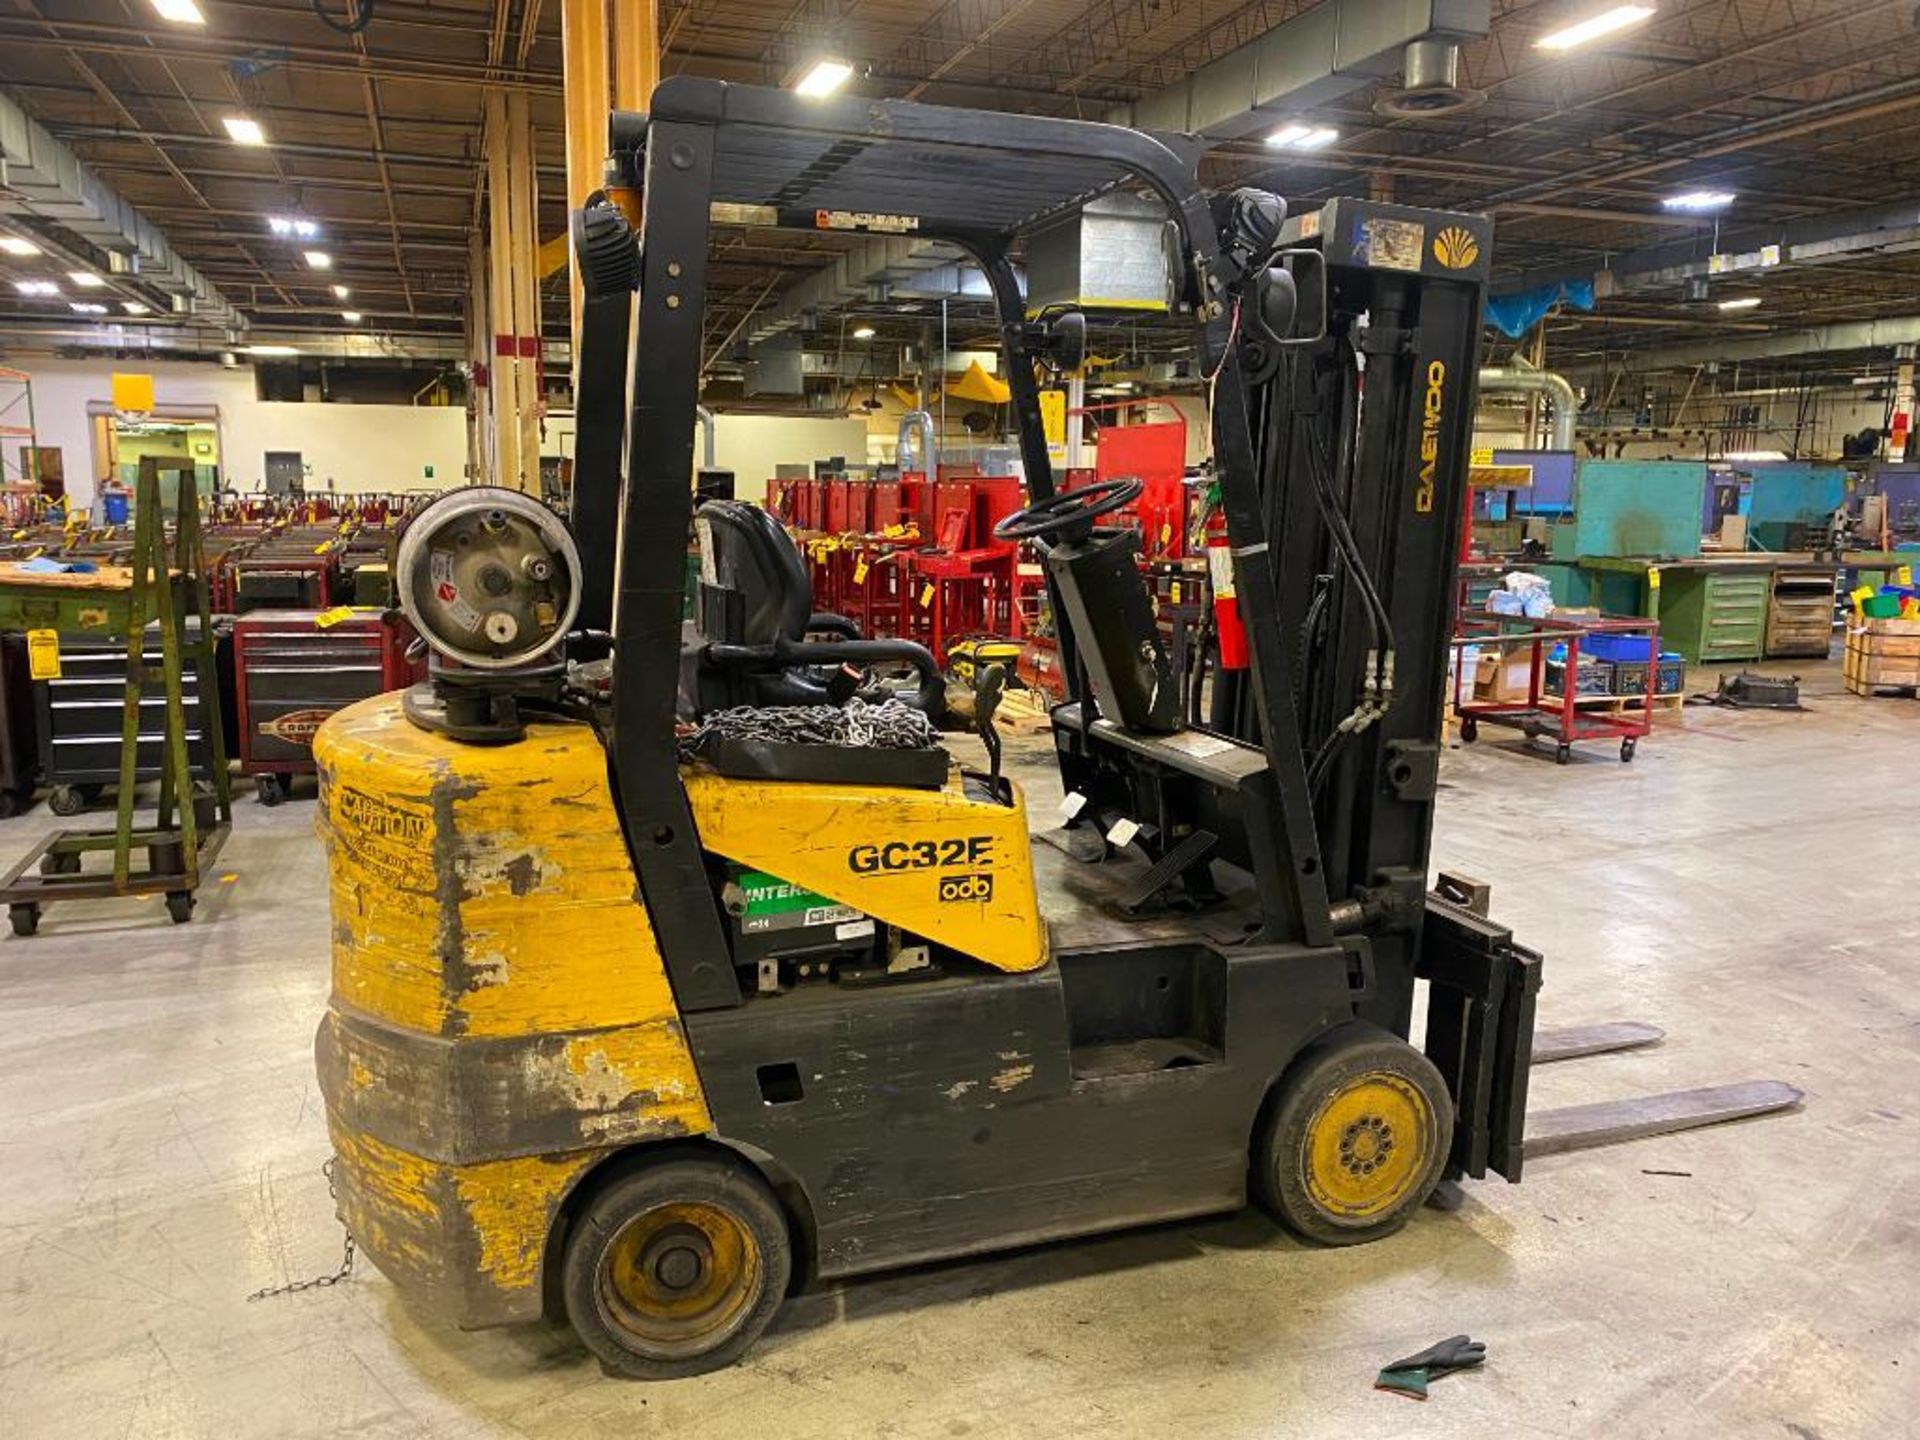 Daewoo GC32E 5,000 lb. Capacity Lpg Forklift, s/n CV-02496, 3-Stage Mast, Solid Tires, 41" Forks, 18 - Image 2 of 5